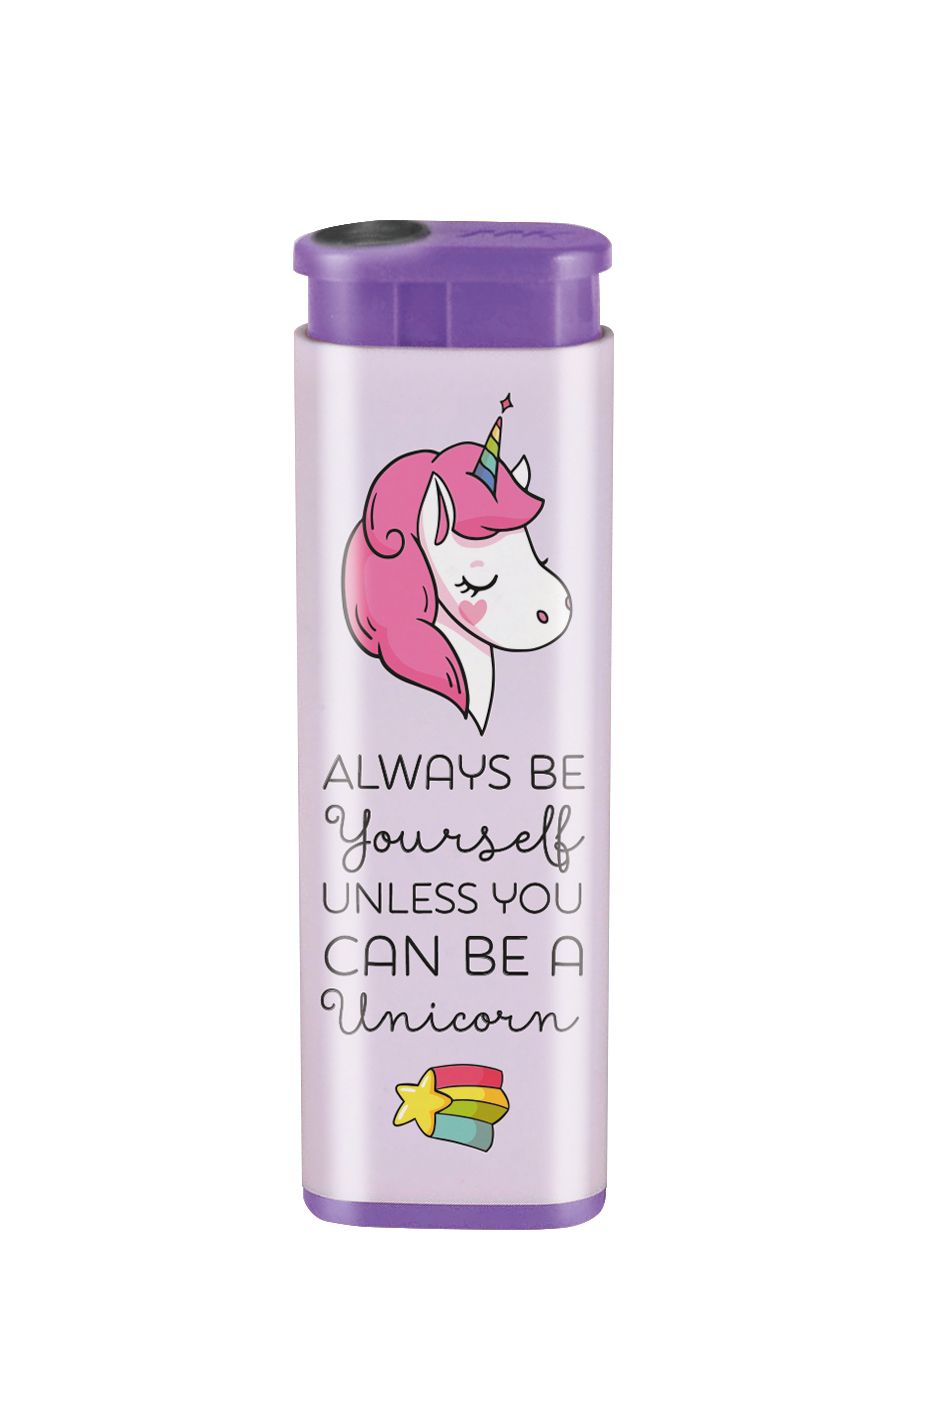 Windproof Lighter Let The Wind Blow - Unicorn